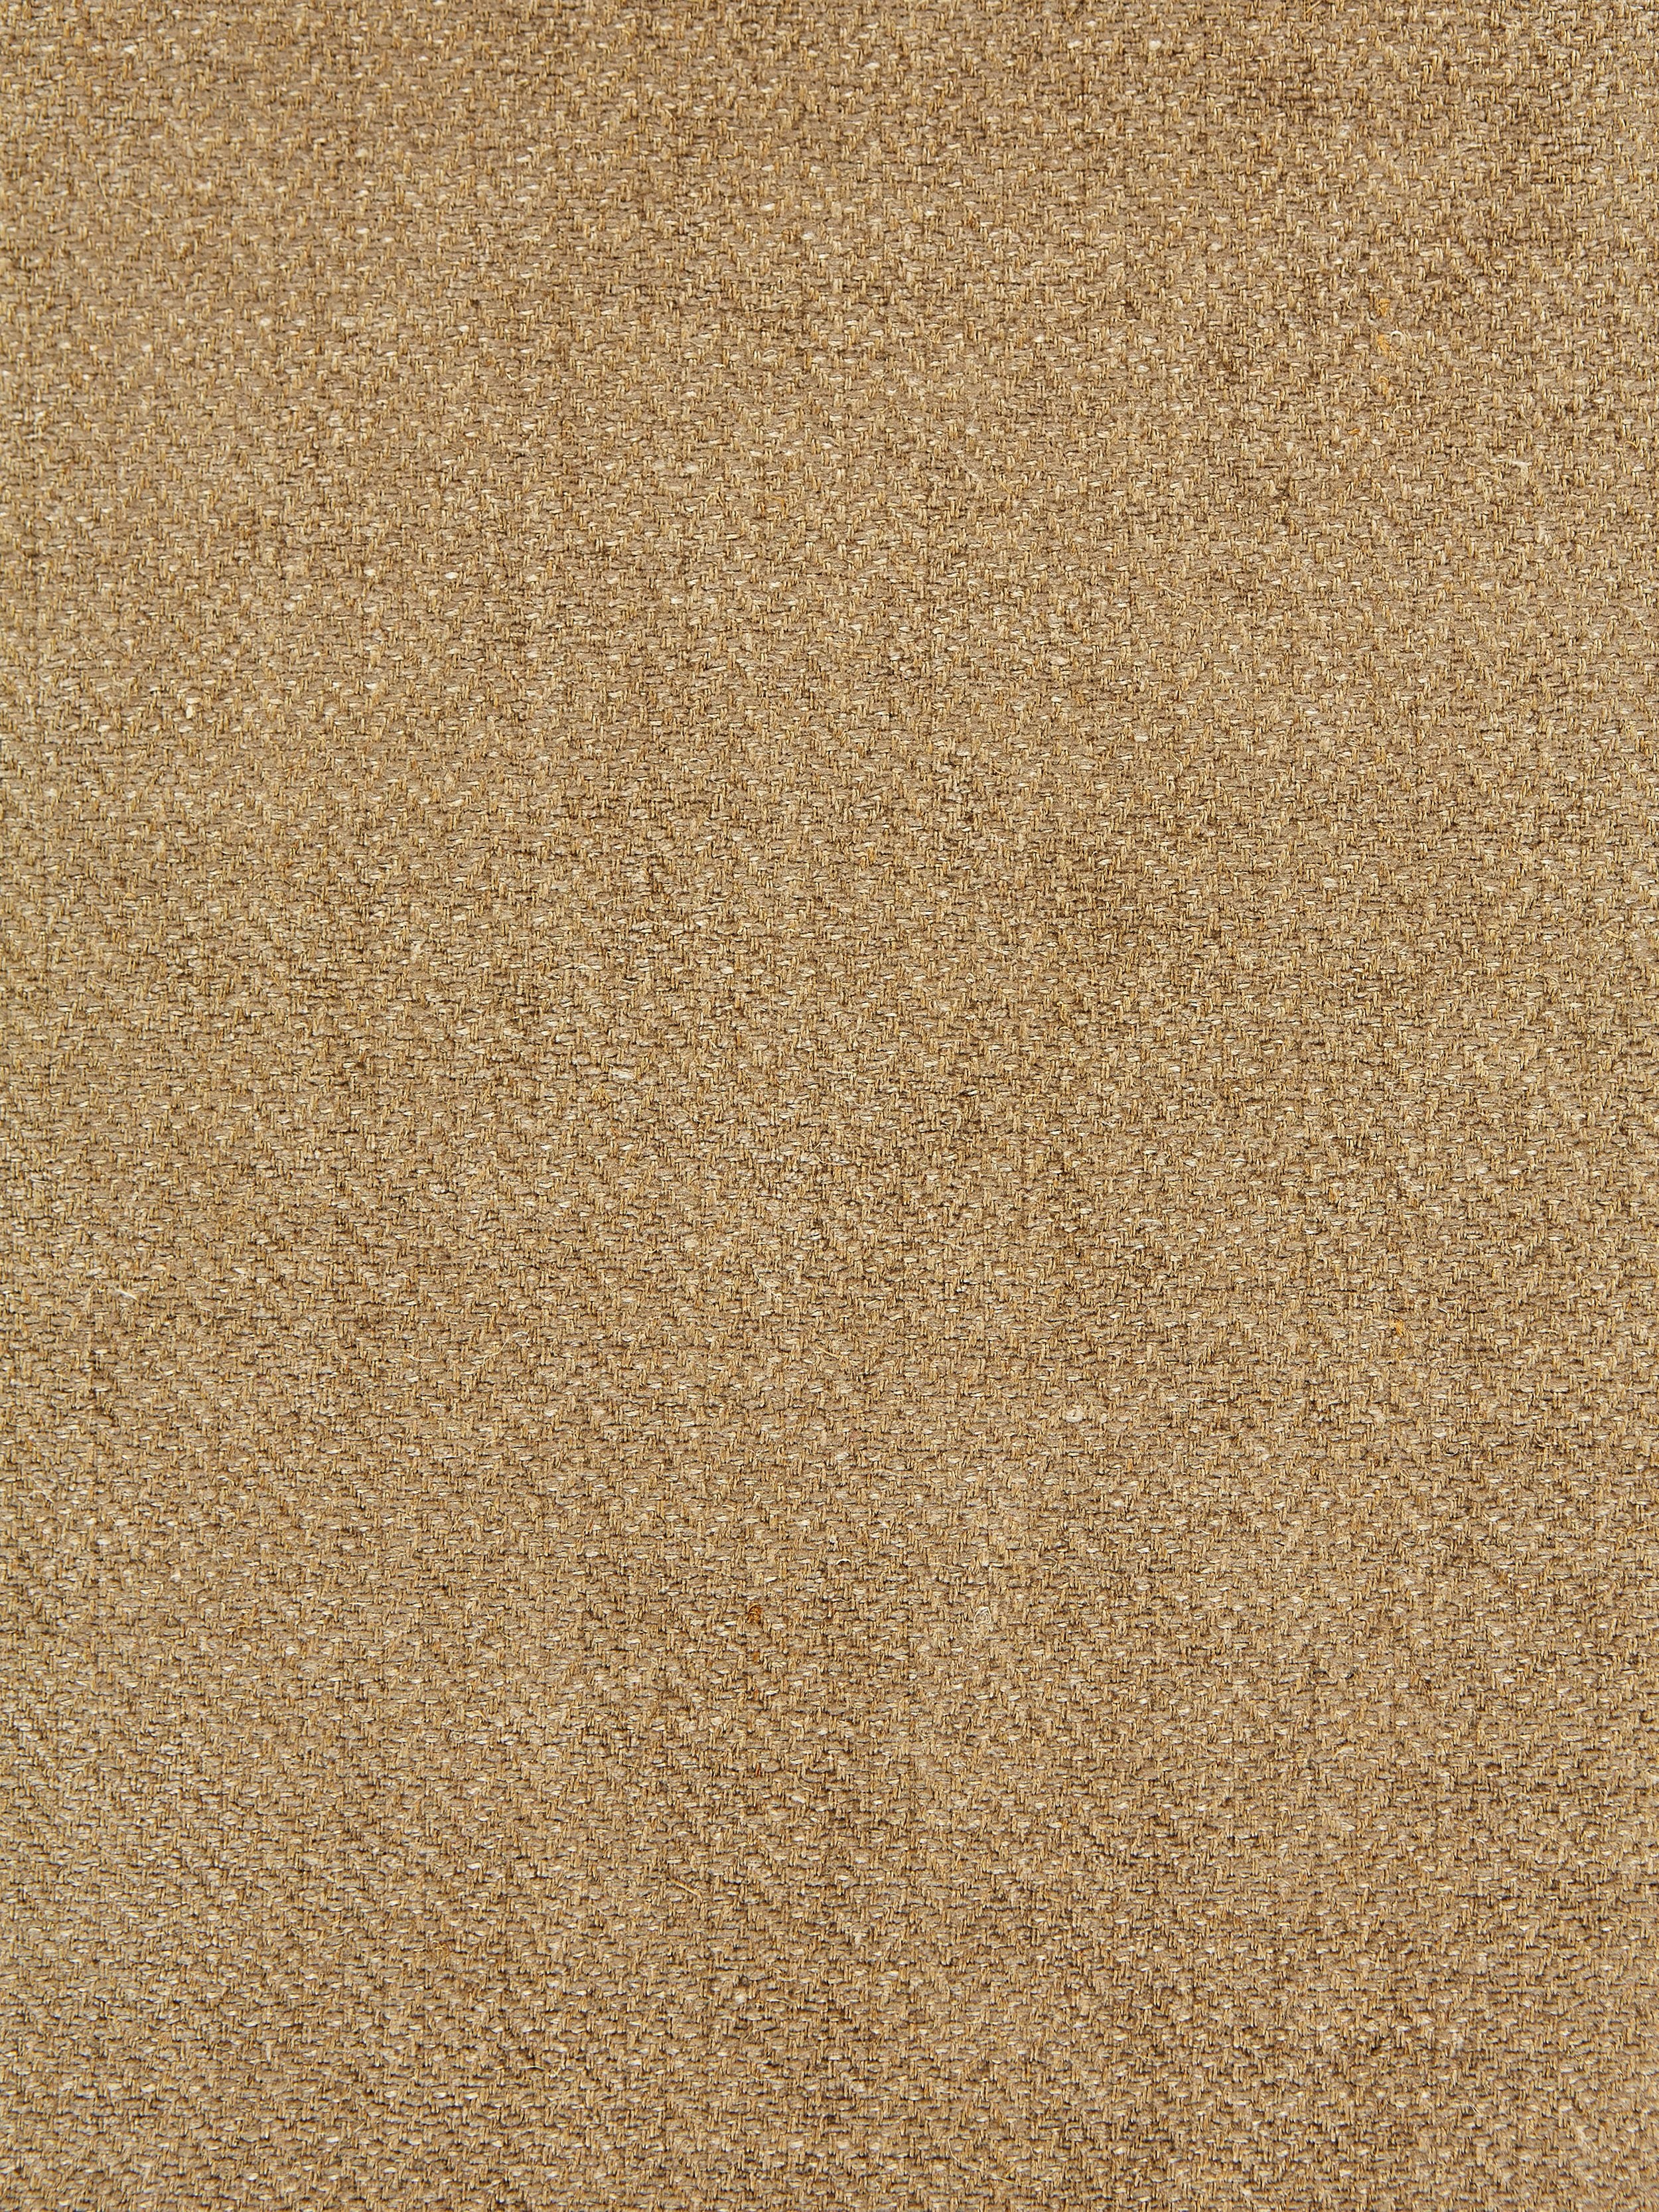 Oxford Herringbone Weave fabric in moleskin color - pattern number SC 000327006 - by Scalamandre in the Scalamandre Fabrics Book 1 collection